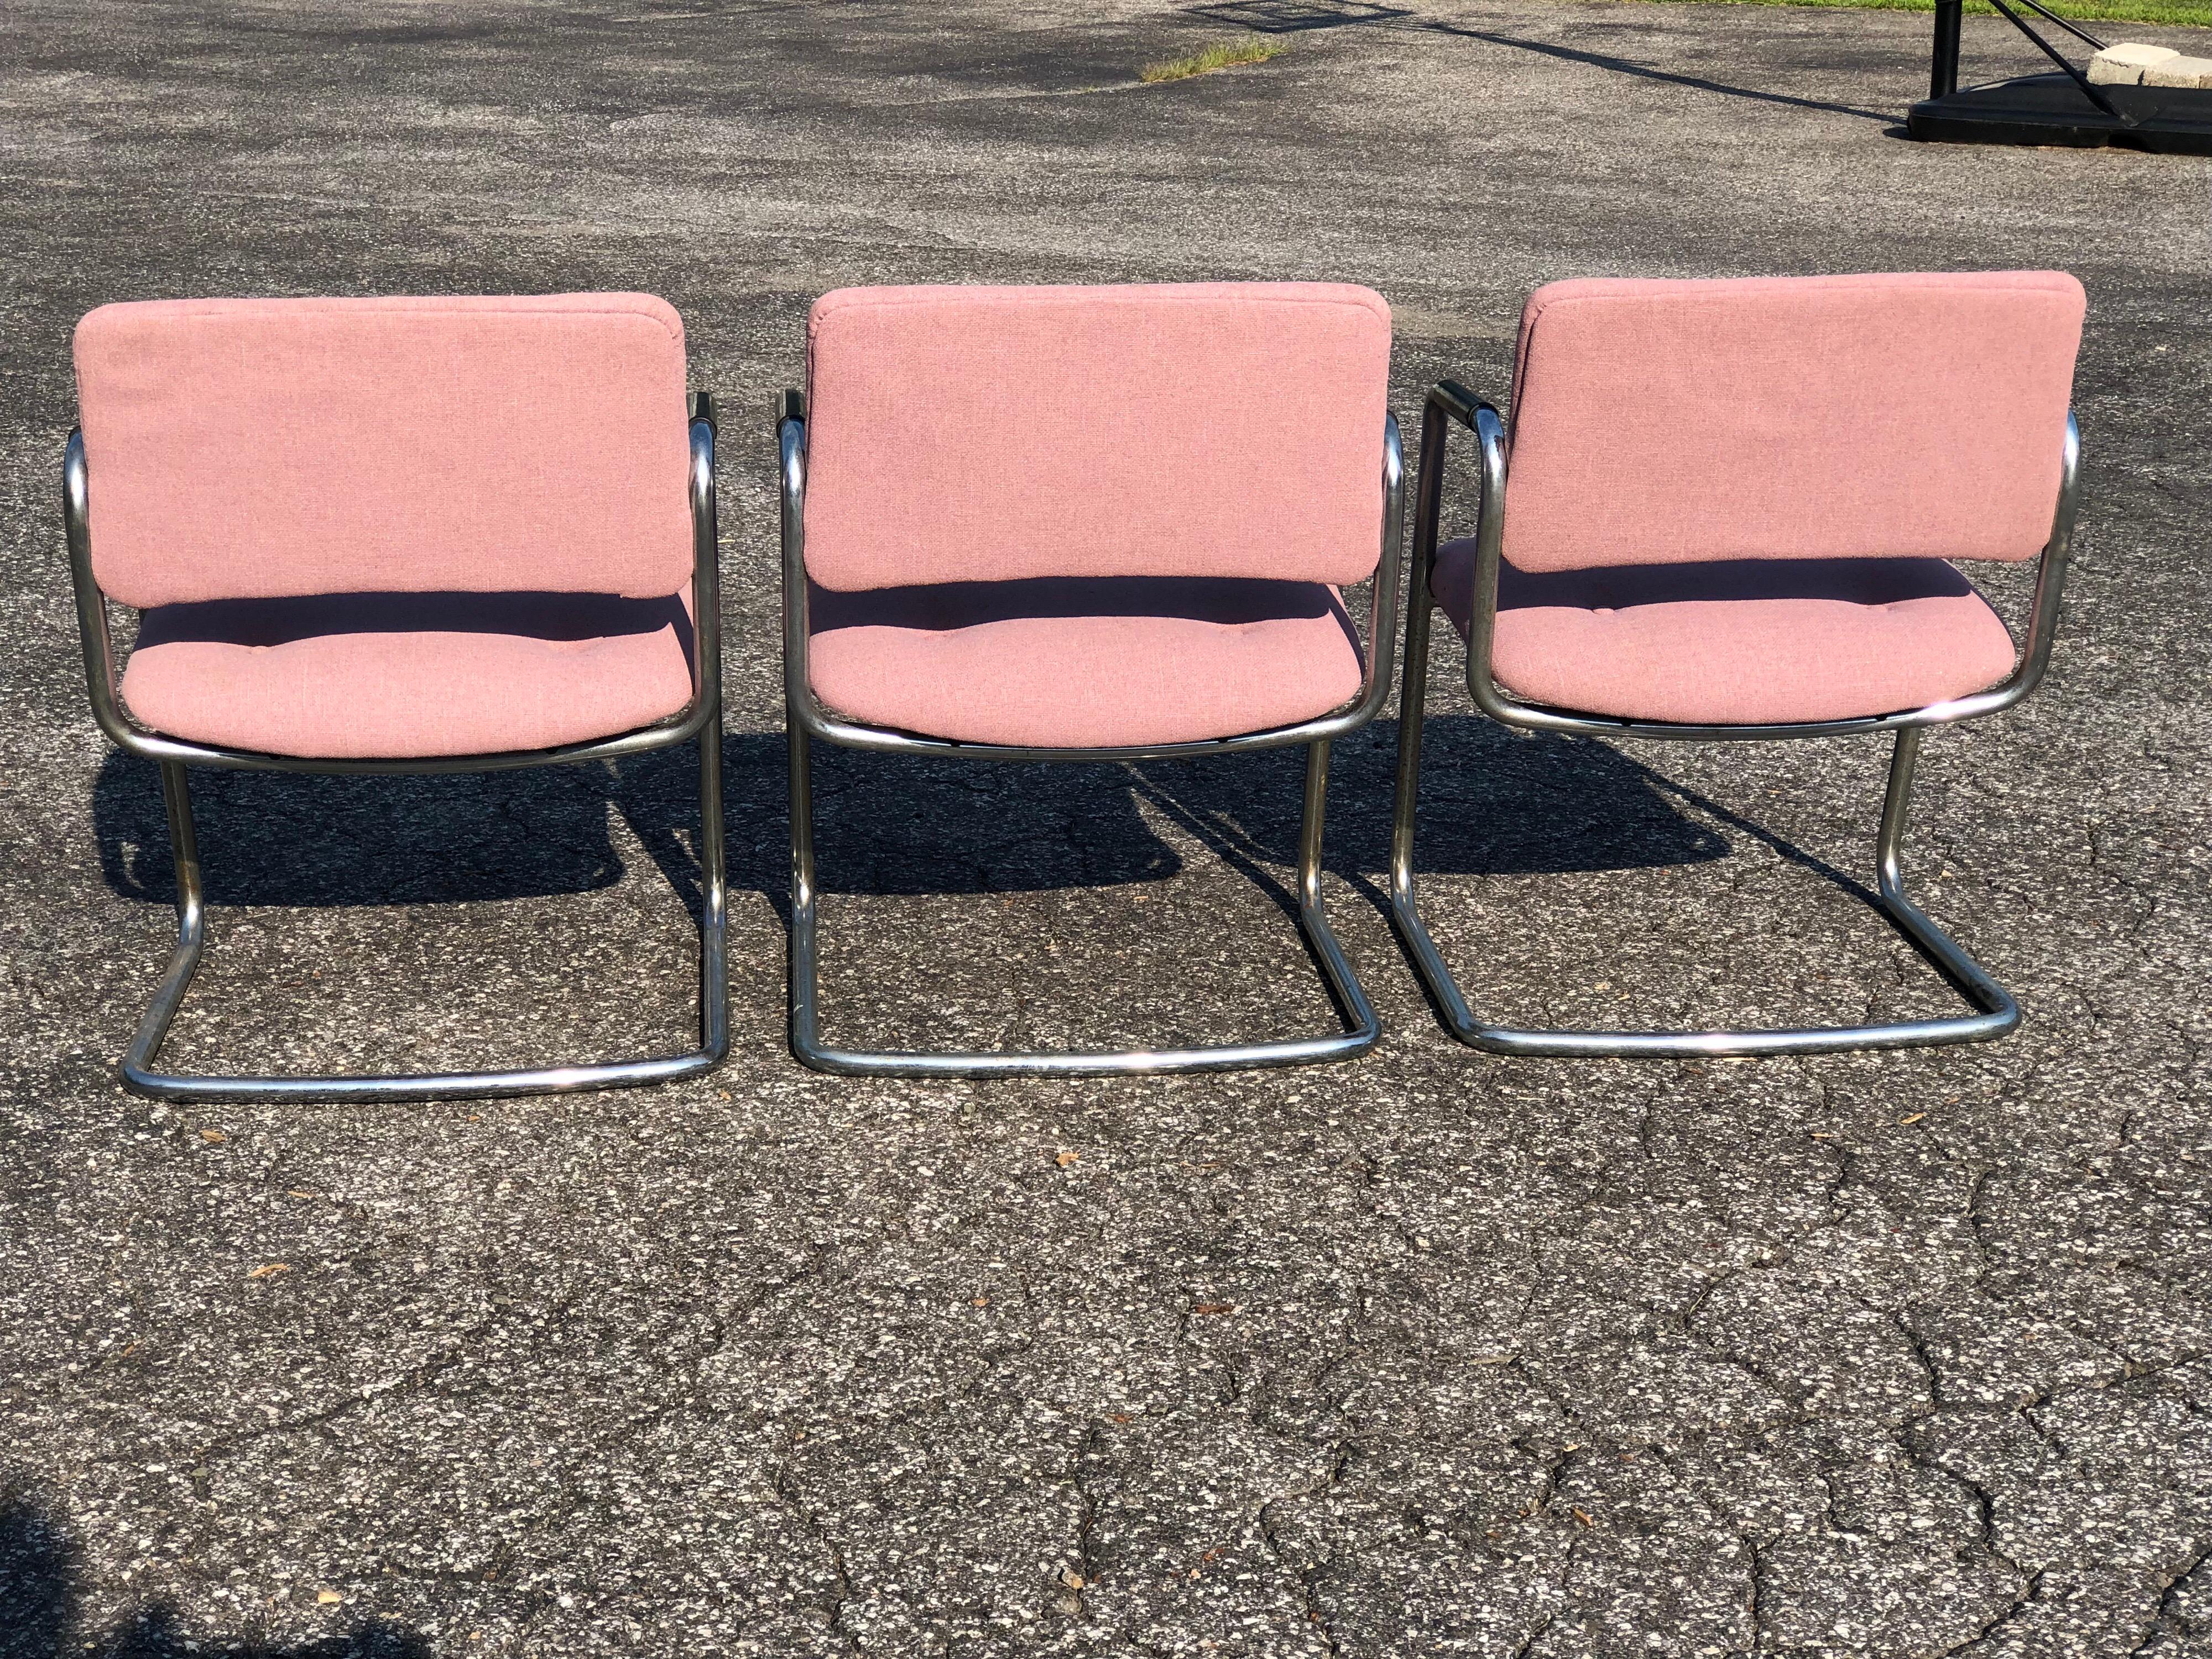 Late 20th Century Set of Three Chrome Steelcase Chairs in Plum